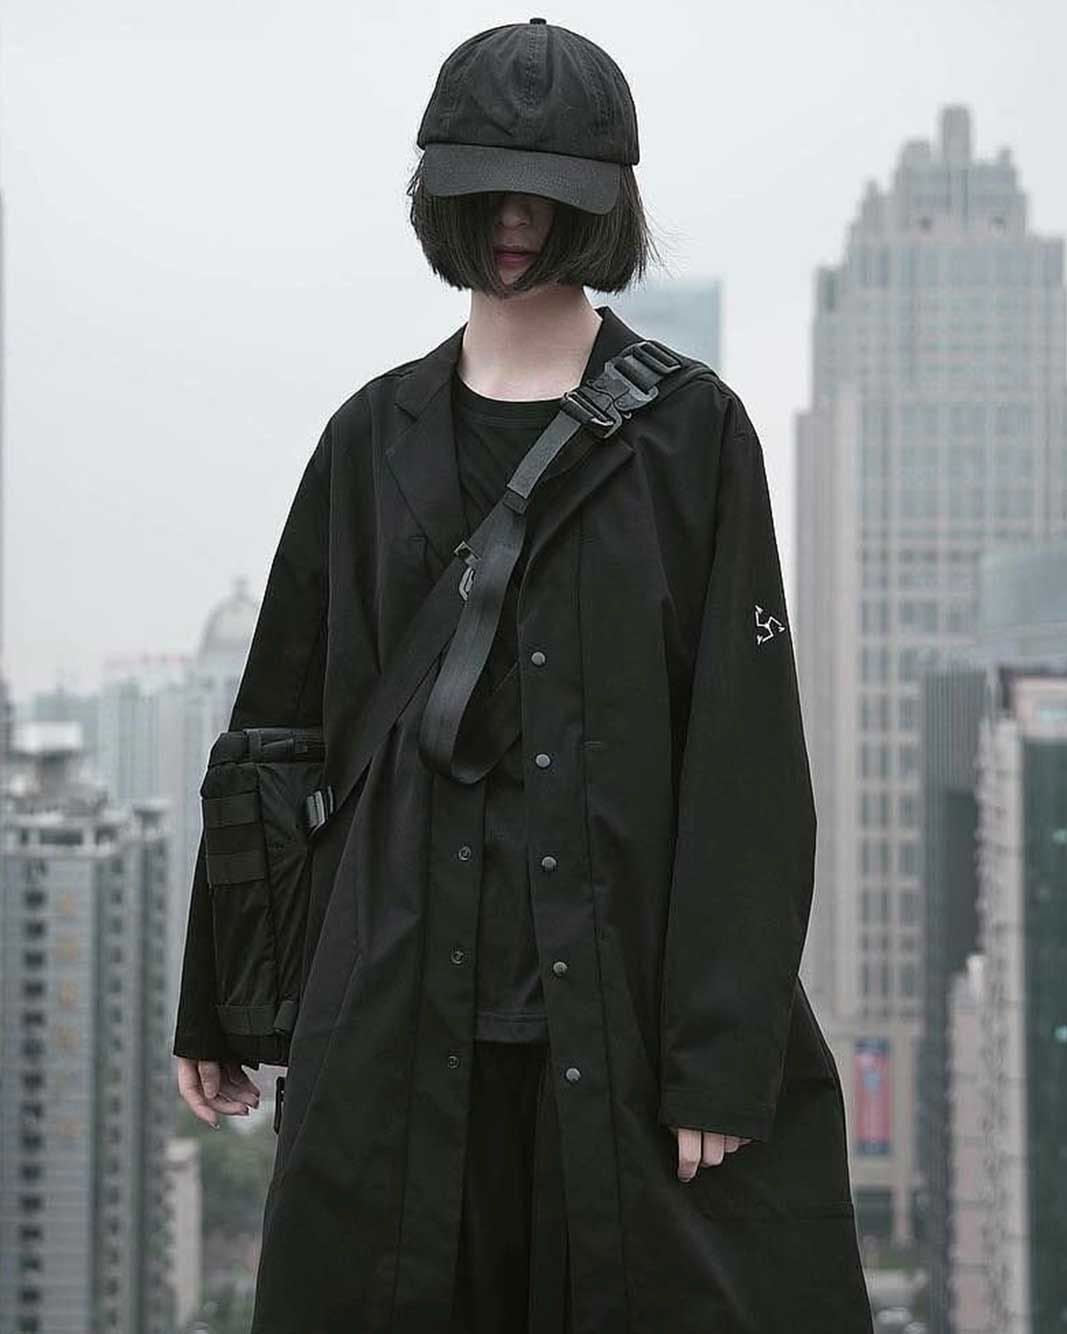 What is darkwear ? This dark outfit is a subgenre from techwear clothings